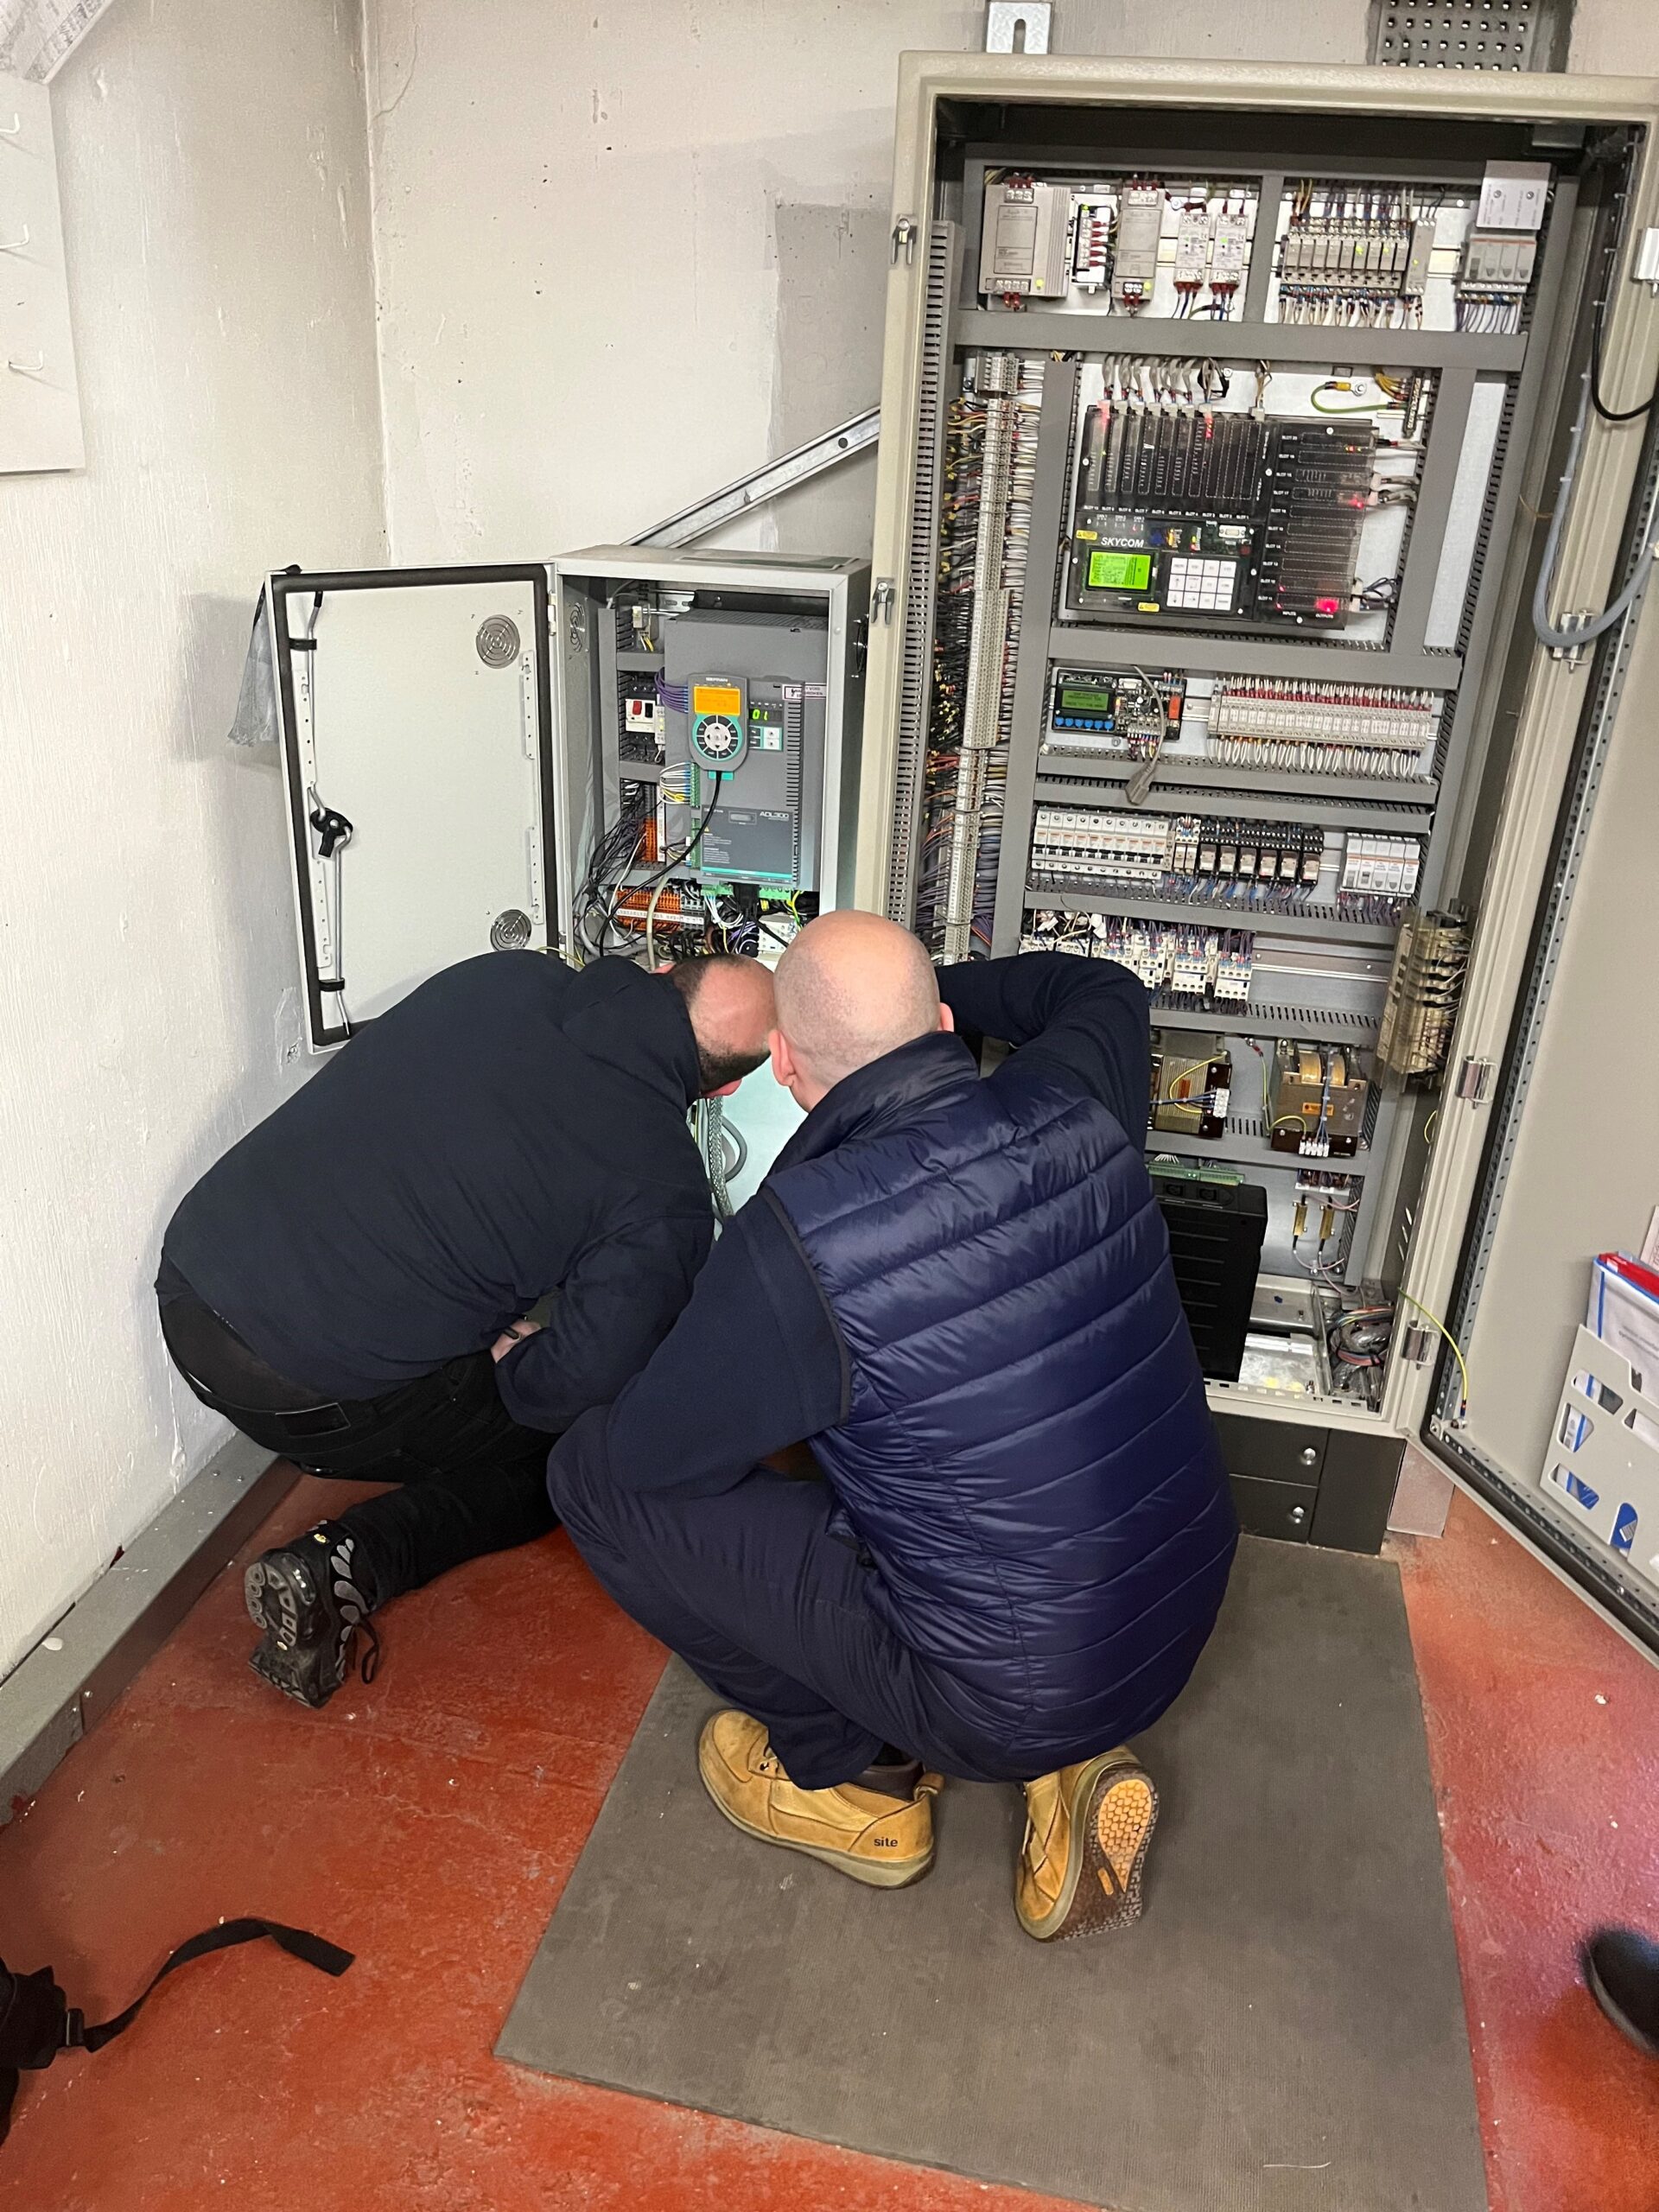 Two lift engineers crouching to look at lift controllers